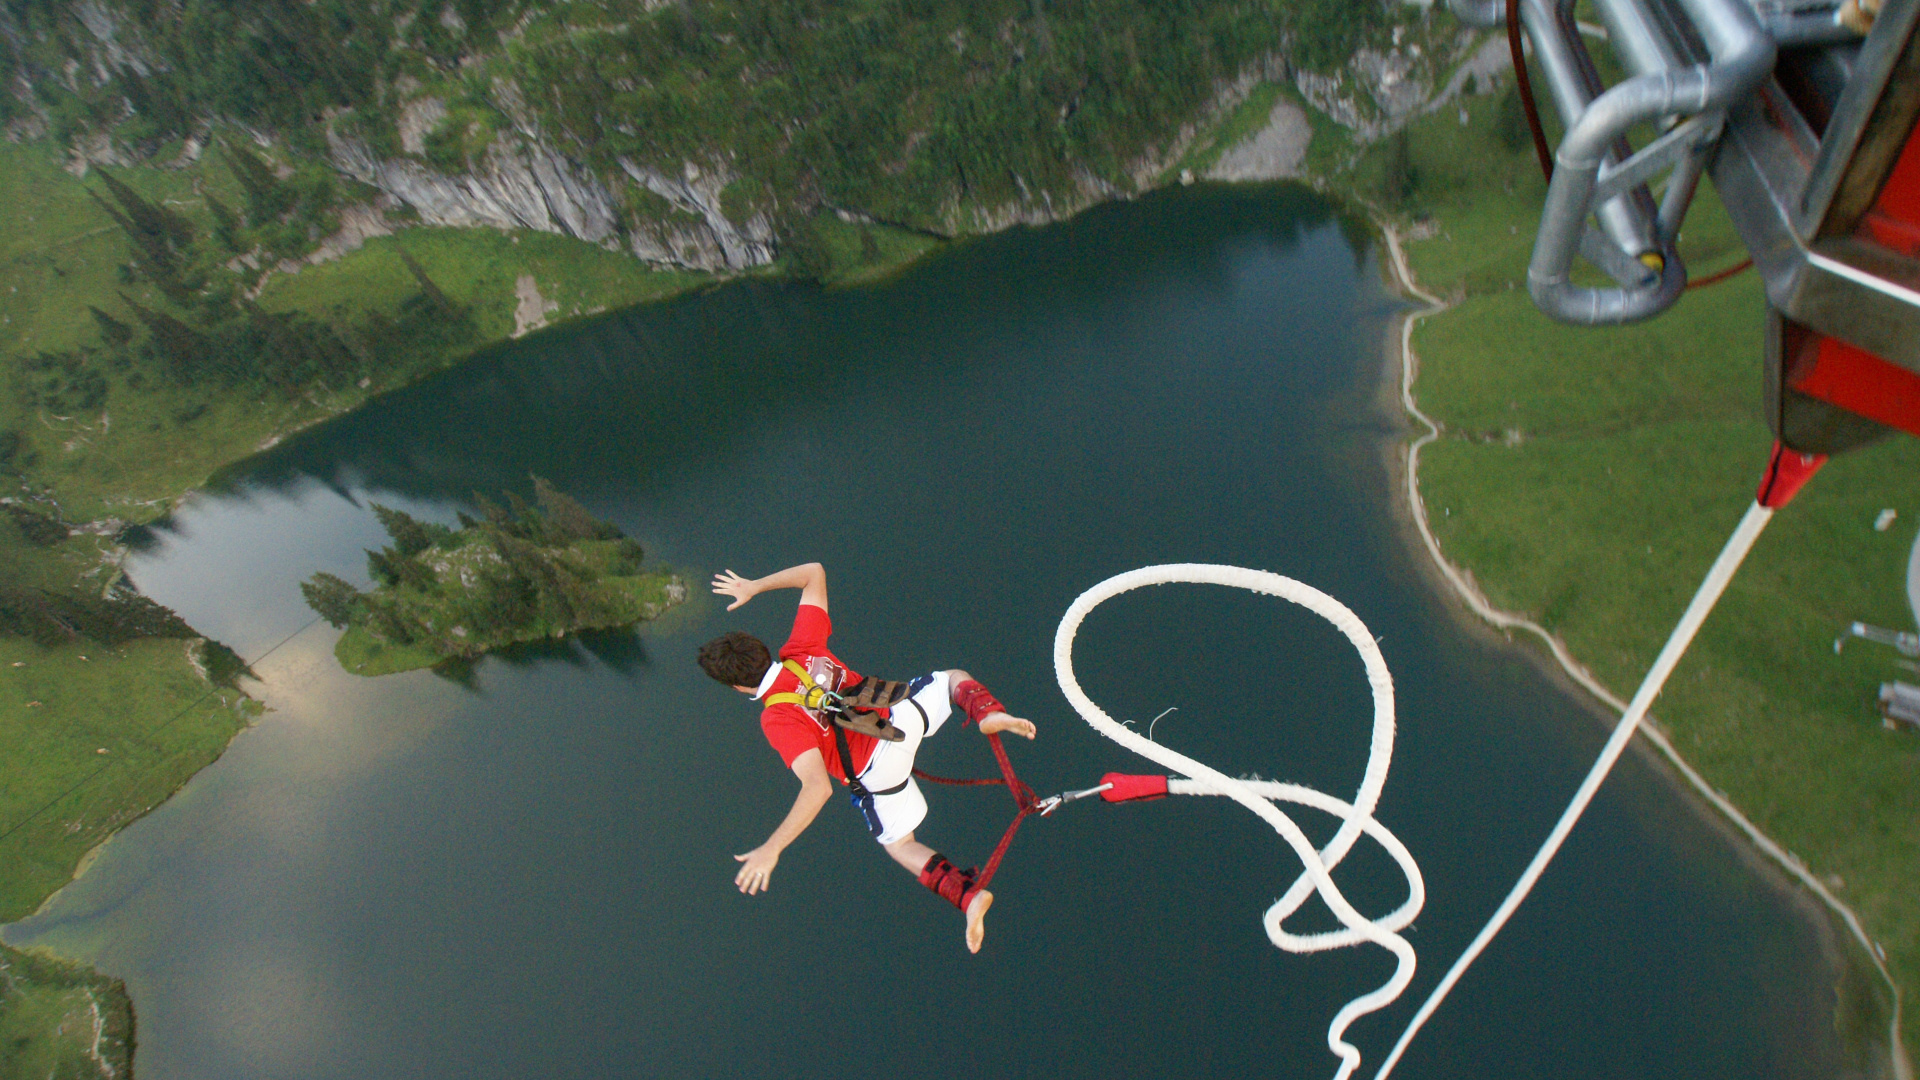 Bungee Jumping: An activity that involves a person falling from a great height while connected to a large elastic cord. 1920x1080 Full HD Wallpaper.